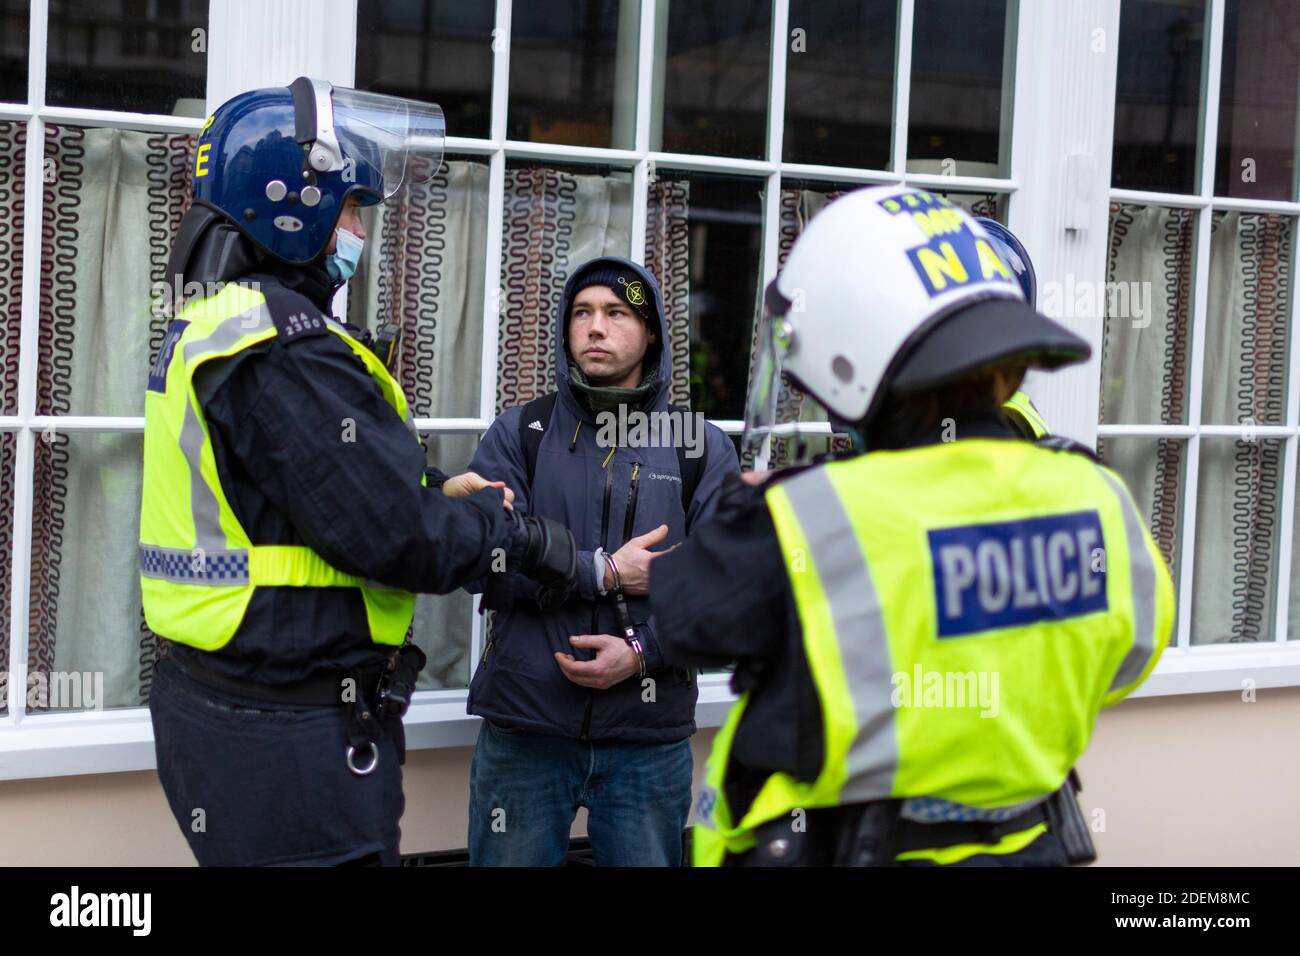 Anti-lockdown protest, London, 28 November 2020. An arrested protester in handcuffs stands with police officers in riot helmets. Stock Photo